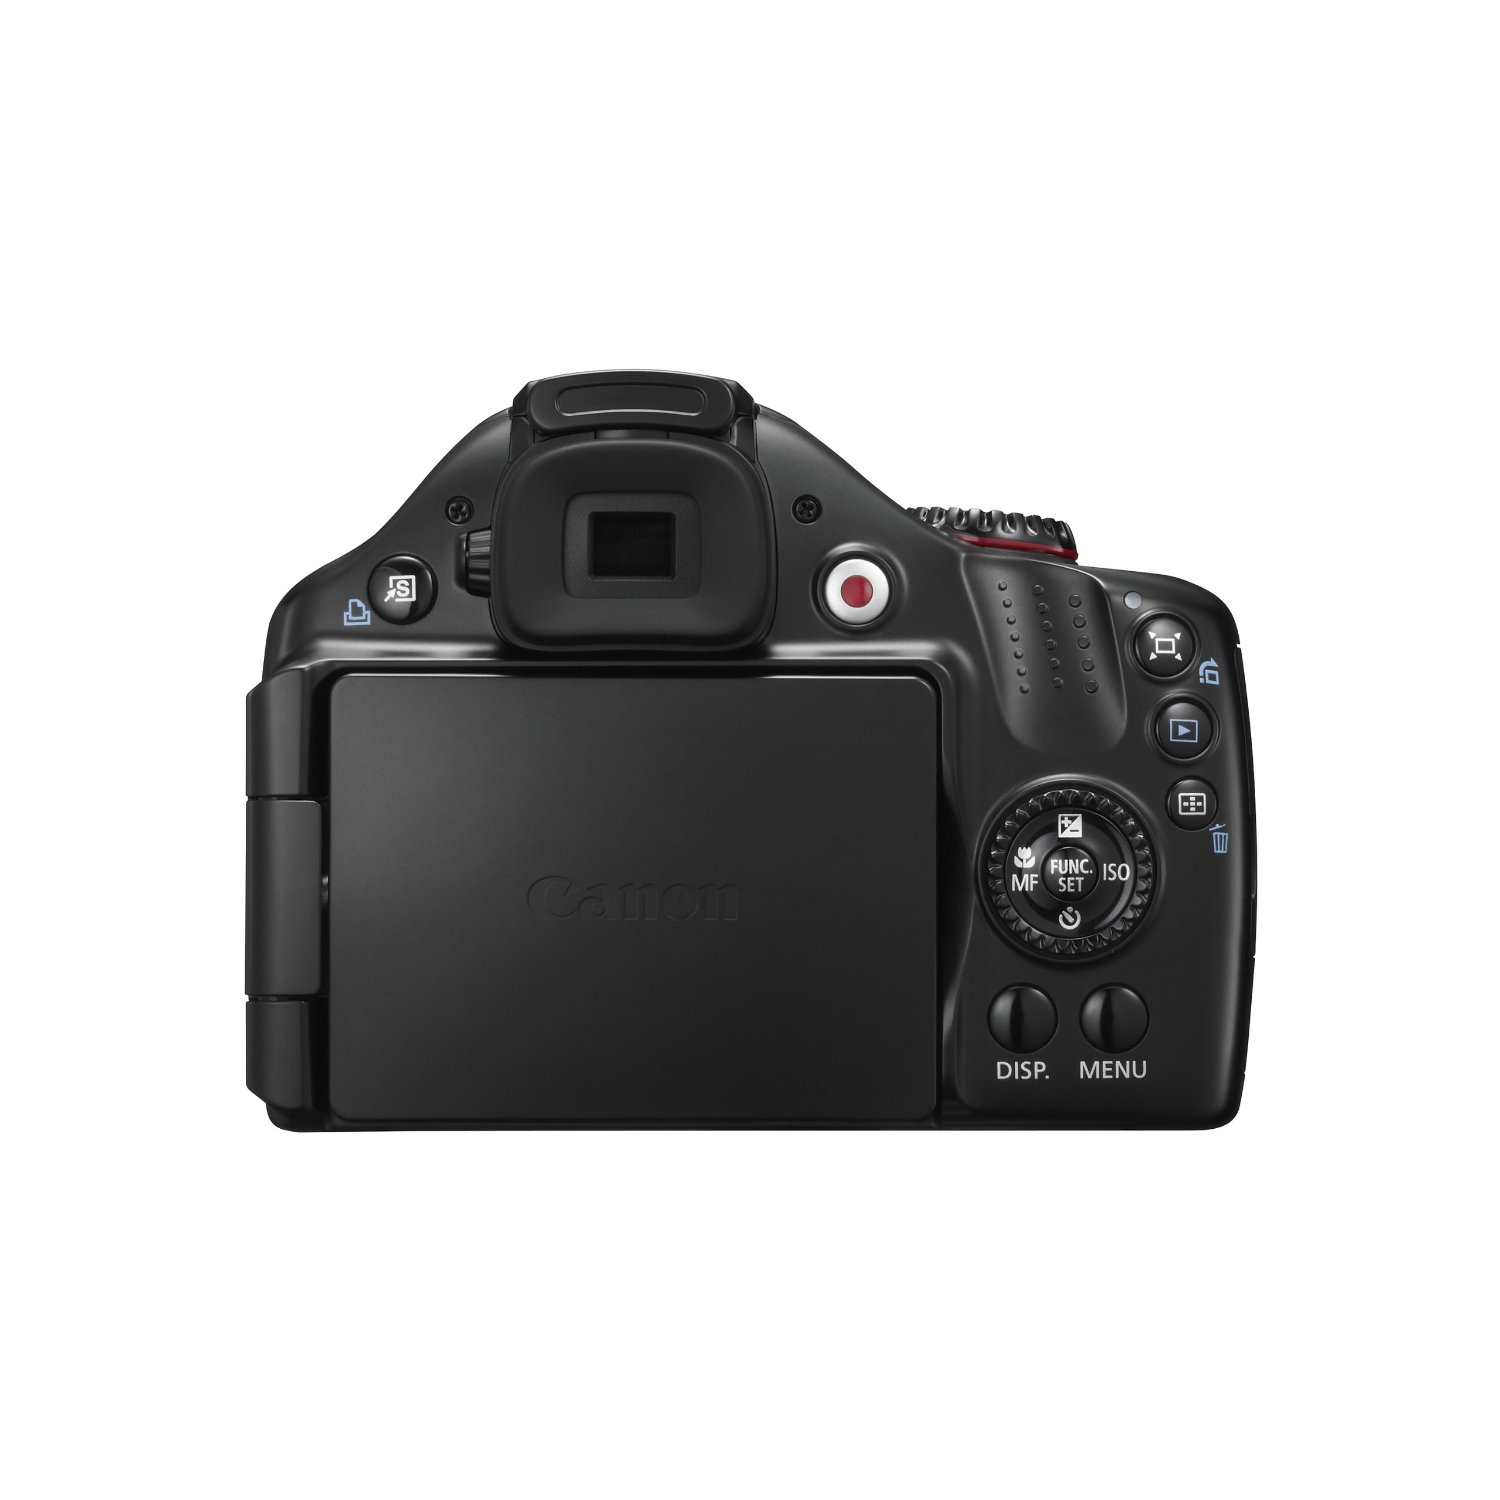 http://thetechjournal.com/wp-content/uploads/images/1110/1319693952-canons-new-sx40-hs-121mp-digital-camera-11.jpg